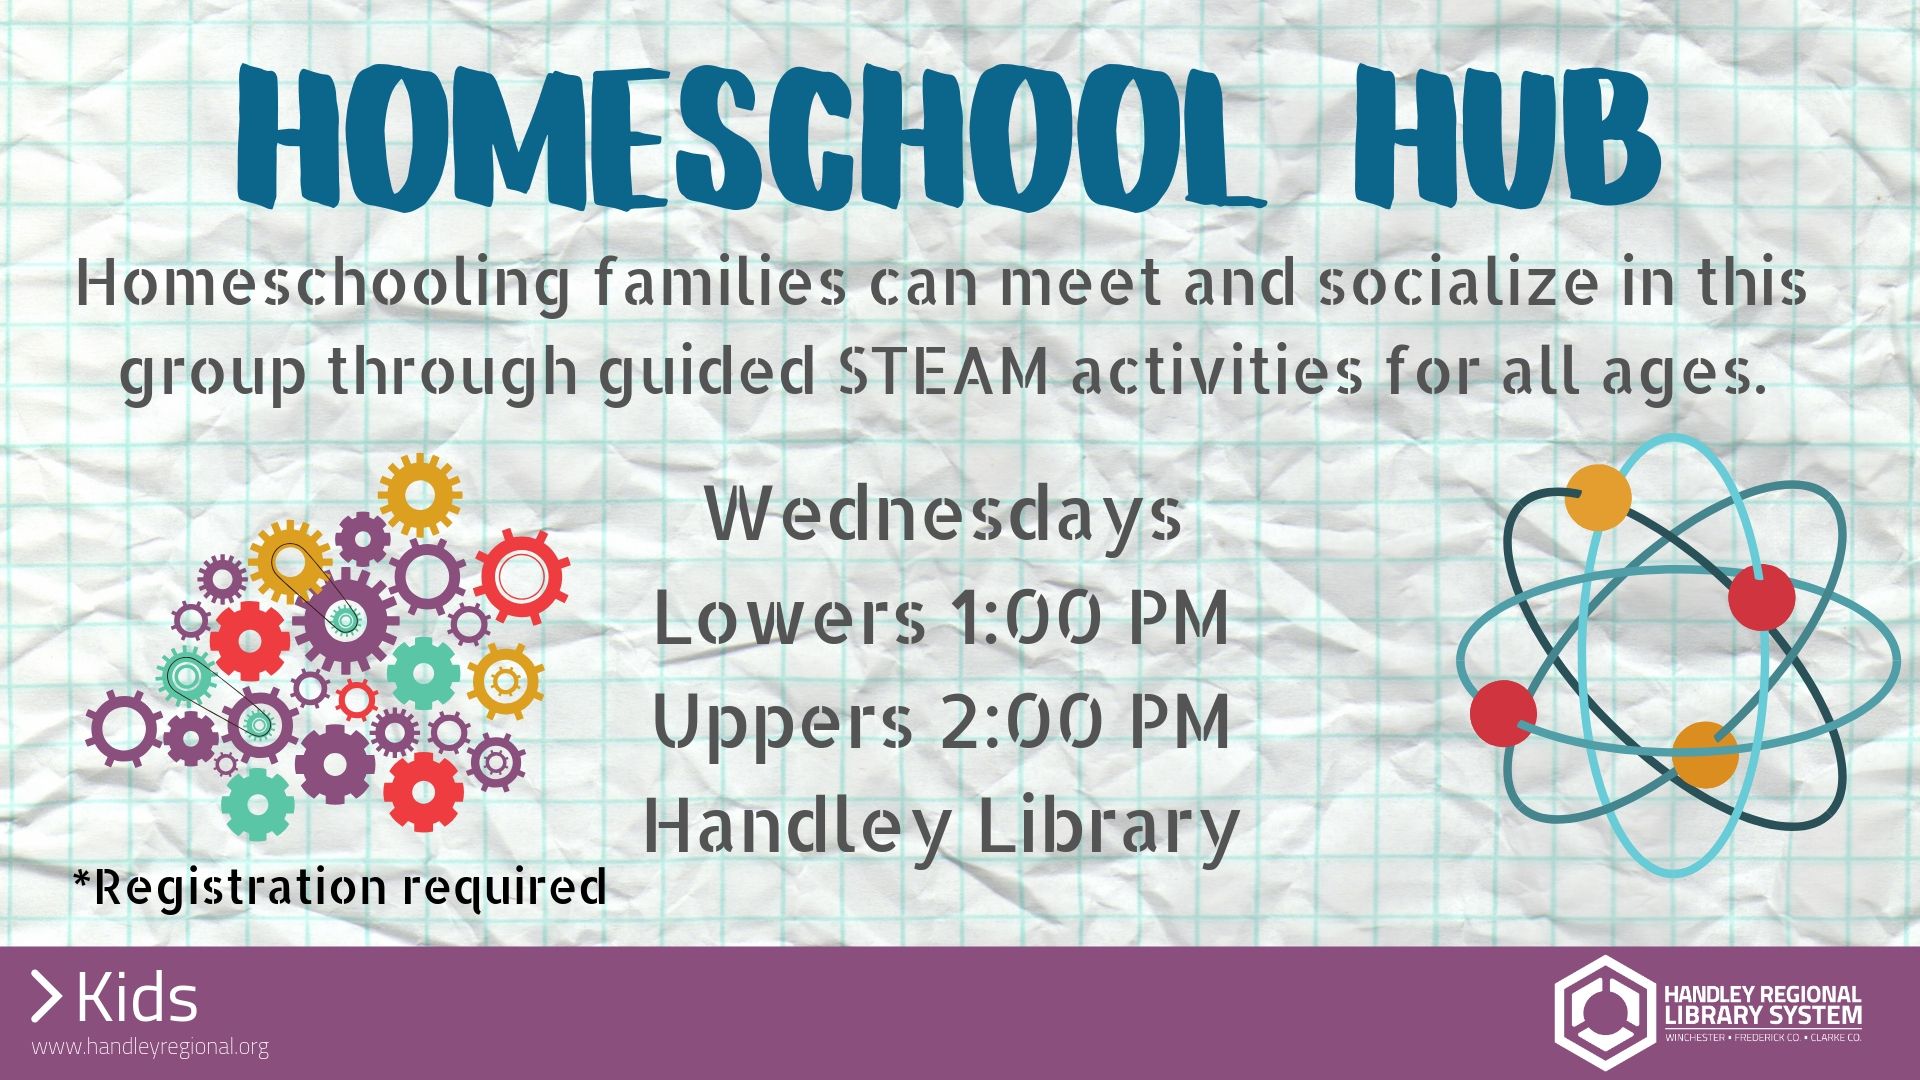 spinning atoms with homeschool hub event info